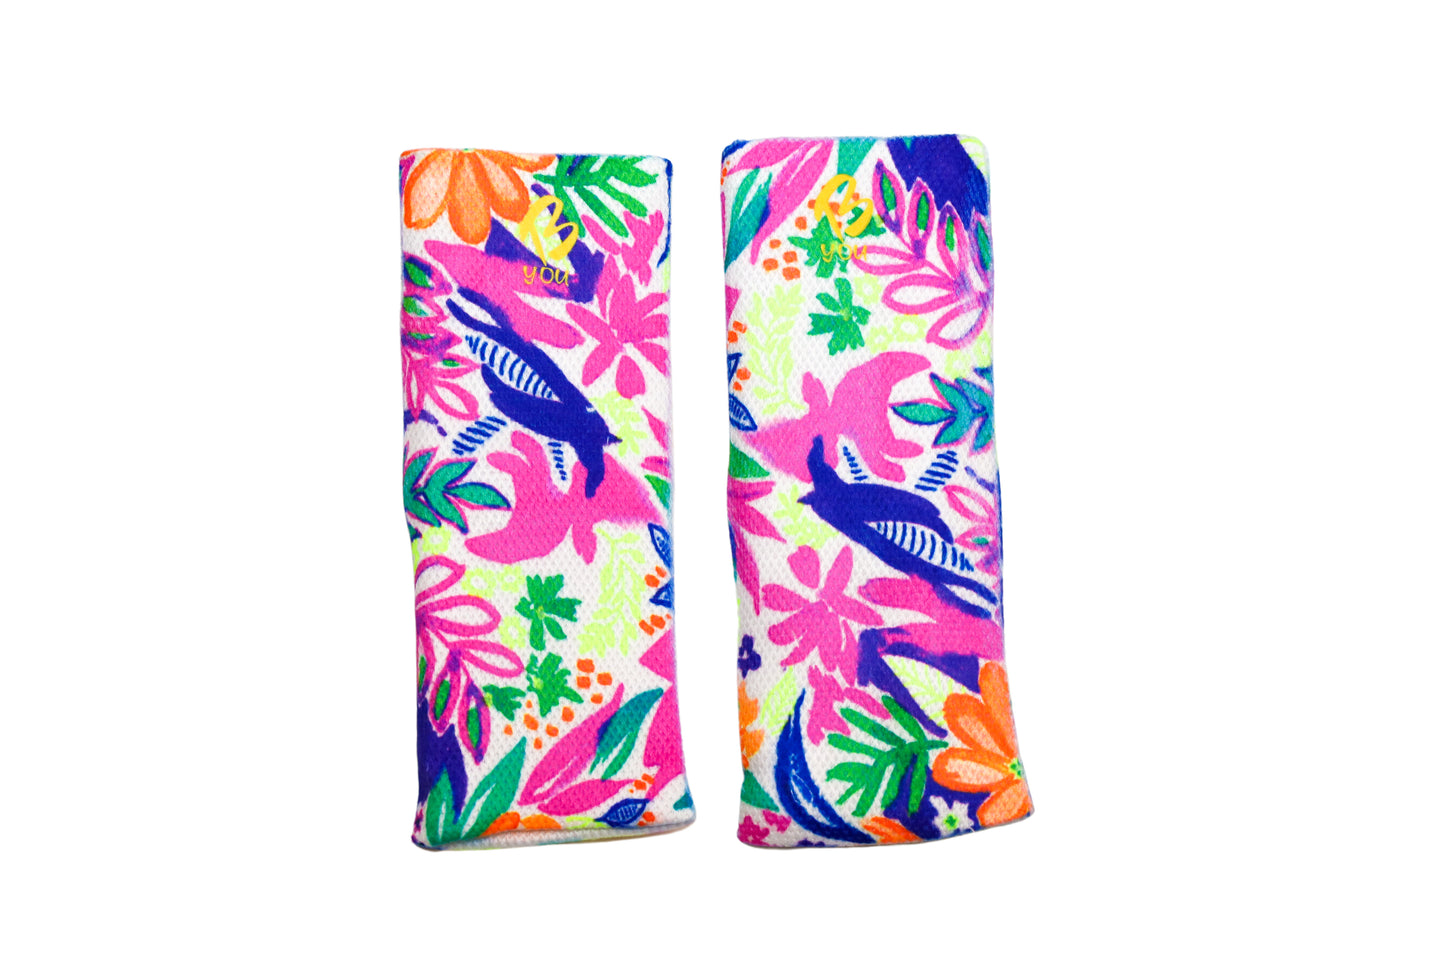 Tropical Print Wristbands for Gymnastics. Gymnastics Grips and Guards. Sweat Bands. Activewear for Girls. Active Girls, Sporty Girls. B you Active, B you Leotards, B you Swimwear. Gymnastics Leotards and equipment.